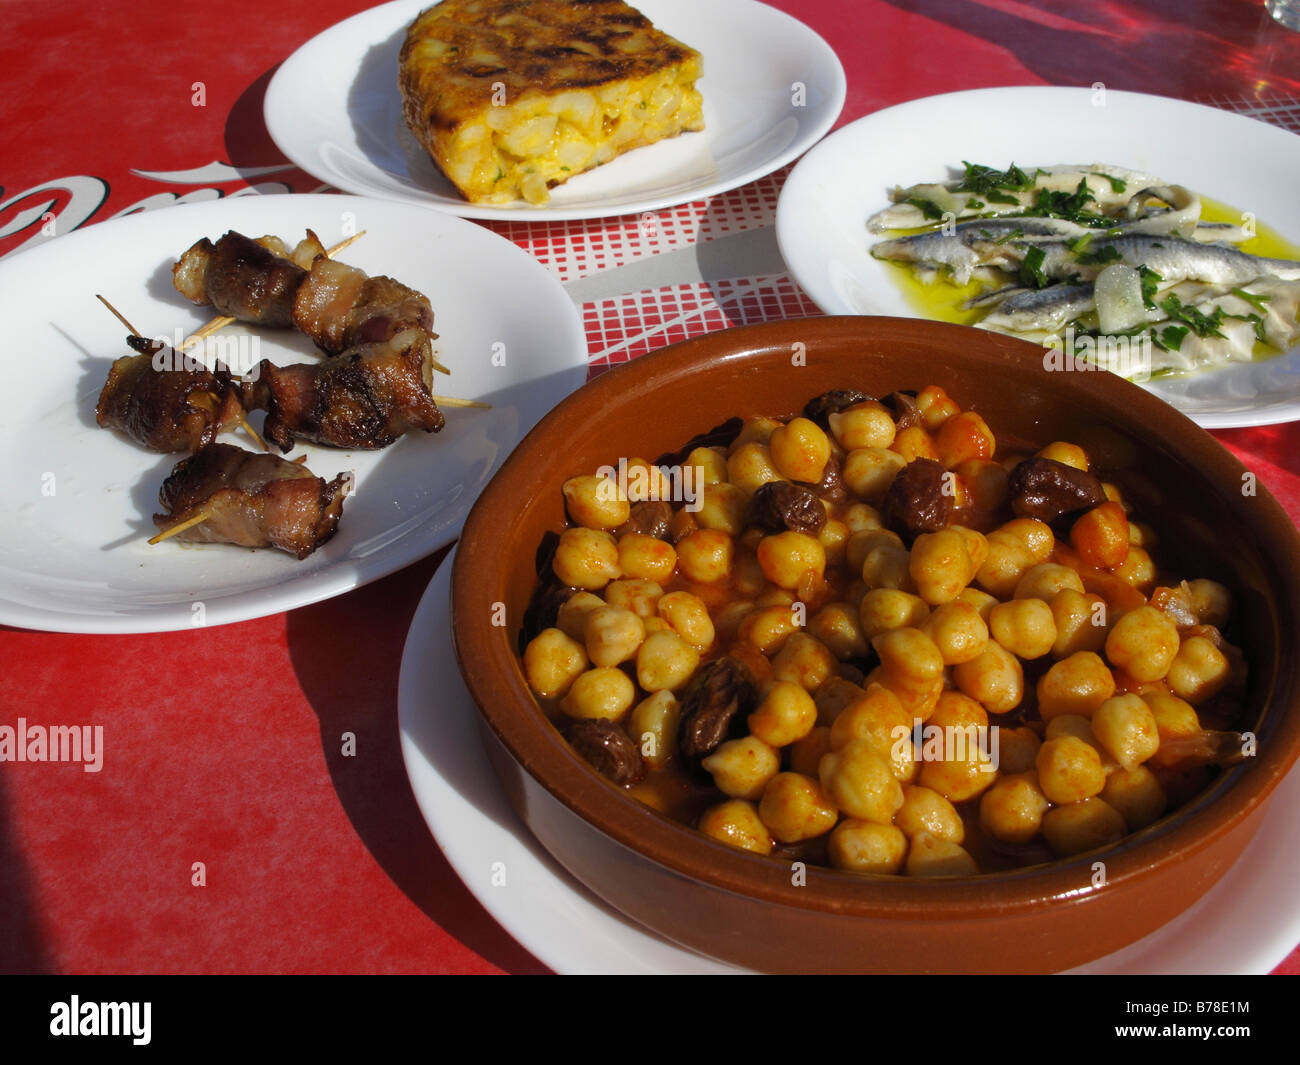 Tapas: chickpeas and other vegetable, La Gomera, Canary Islands, Spain, Europe Stock Photo